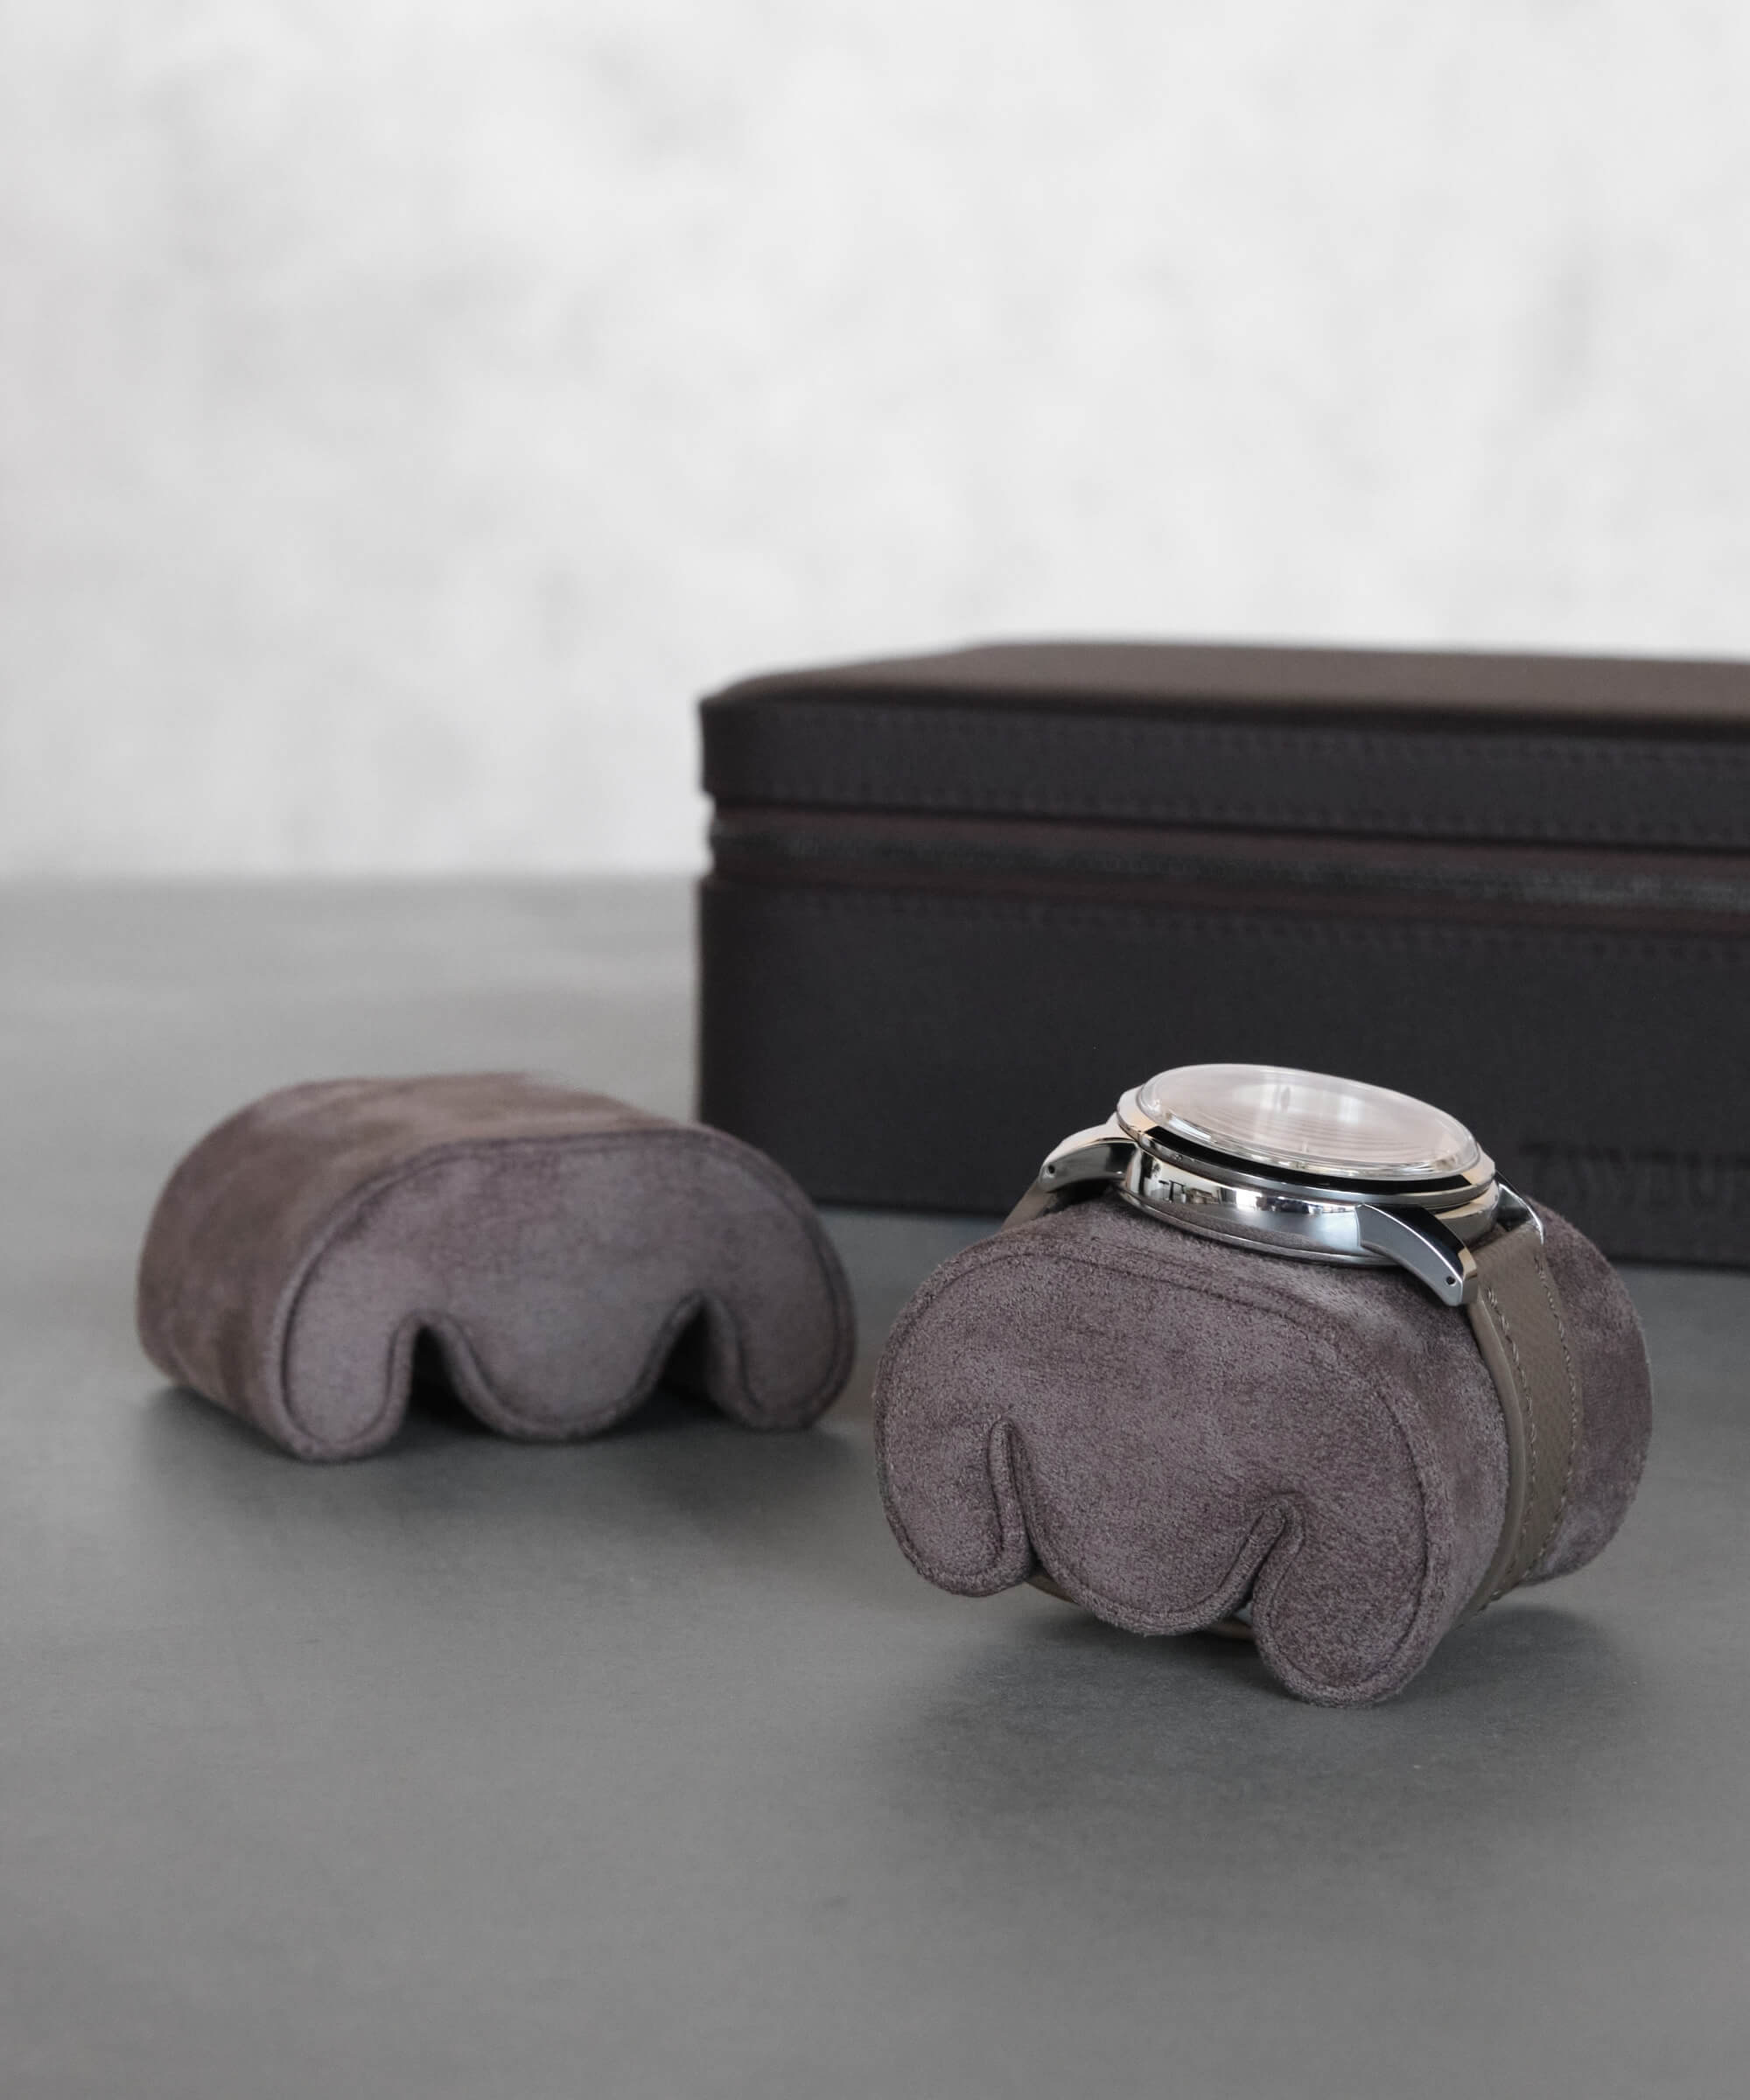 A TAWBURY Fraser 3 Watch Travel Case - Brown with a watch holder and hidden compartment for storing extra watch straps or small accessories.